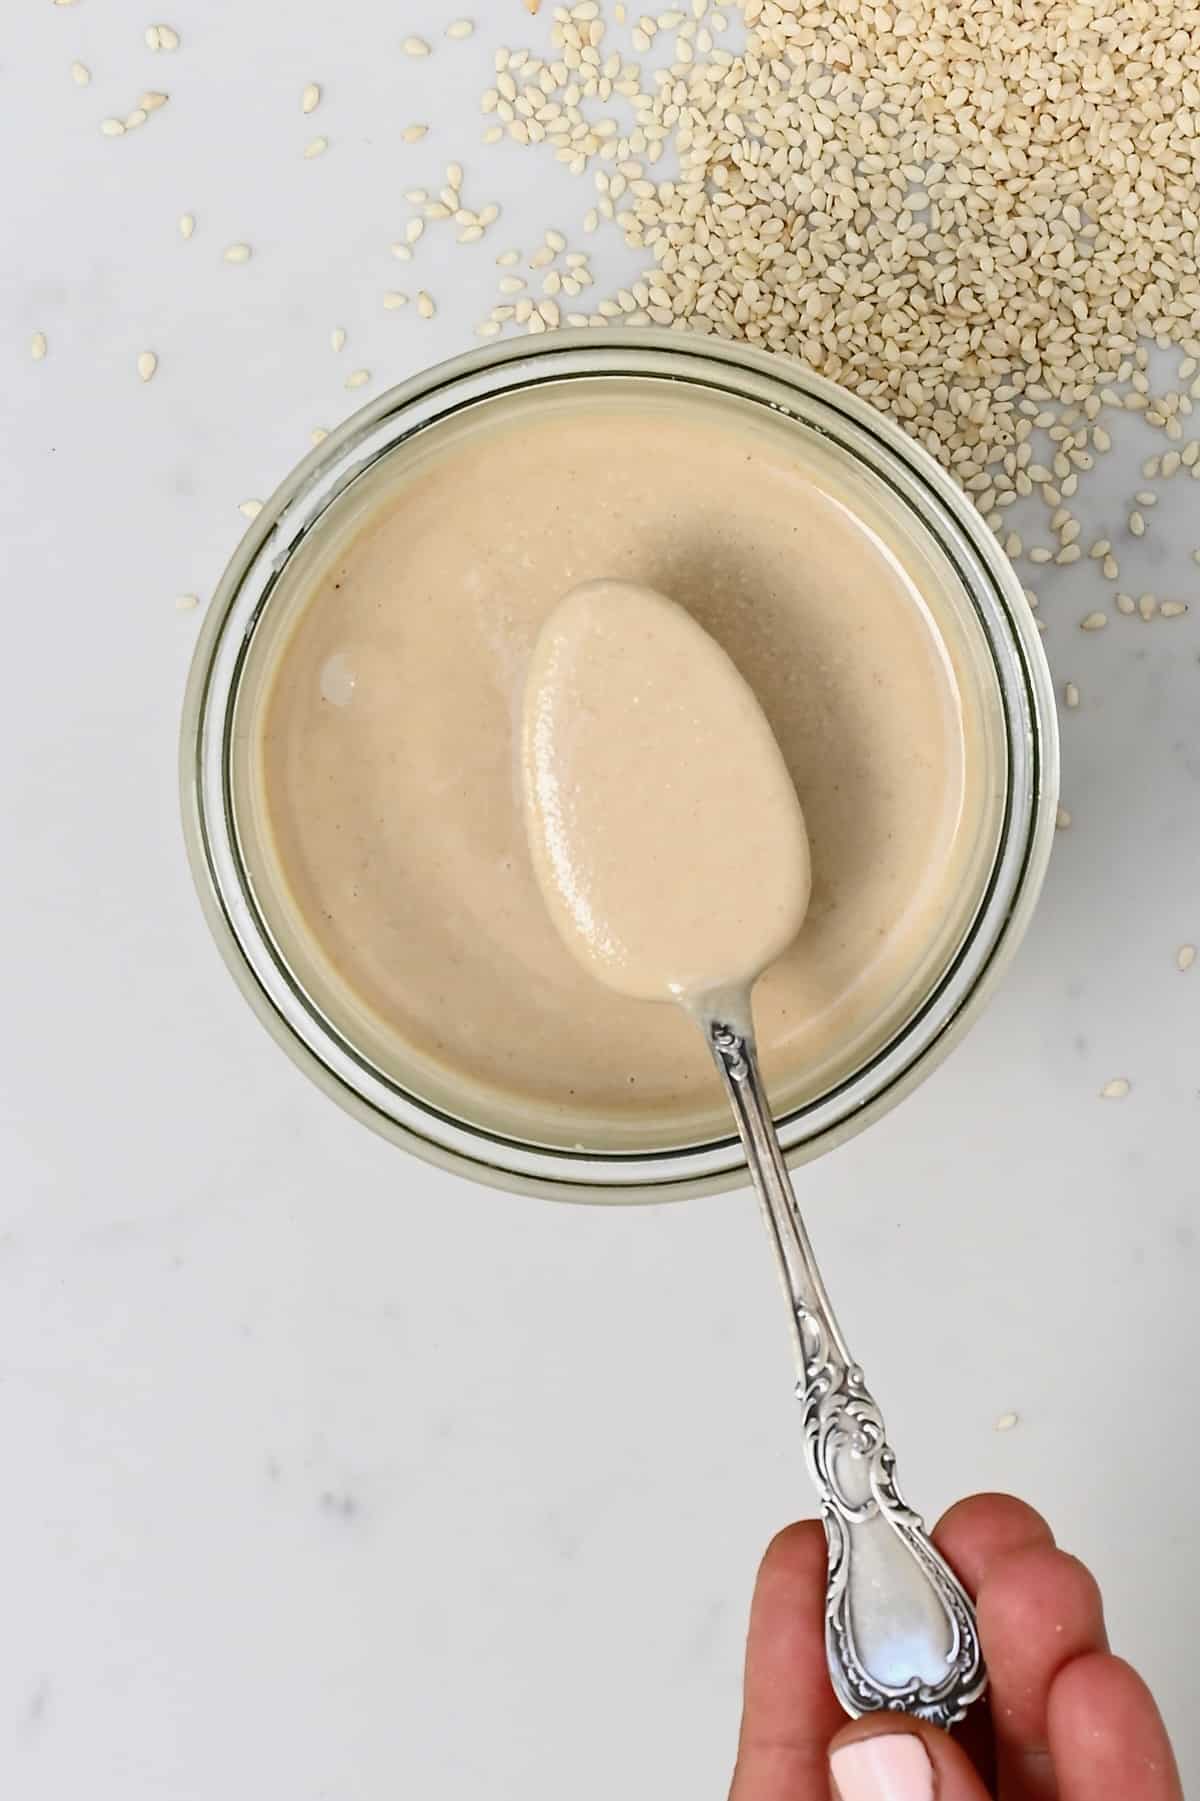 A spoonful of homemade sesame paste